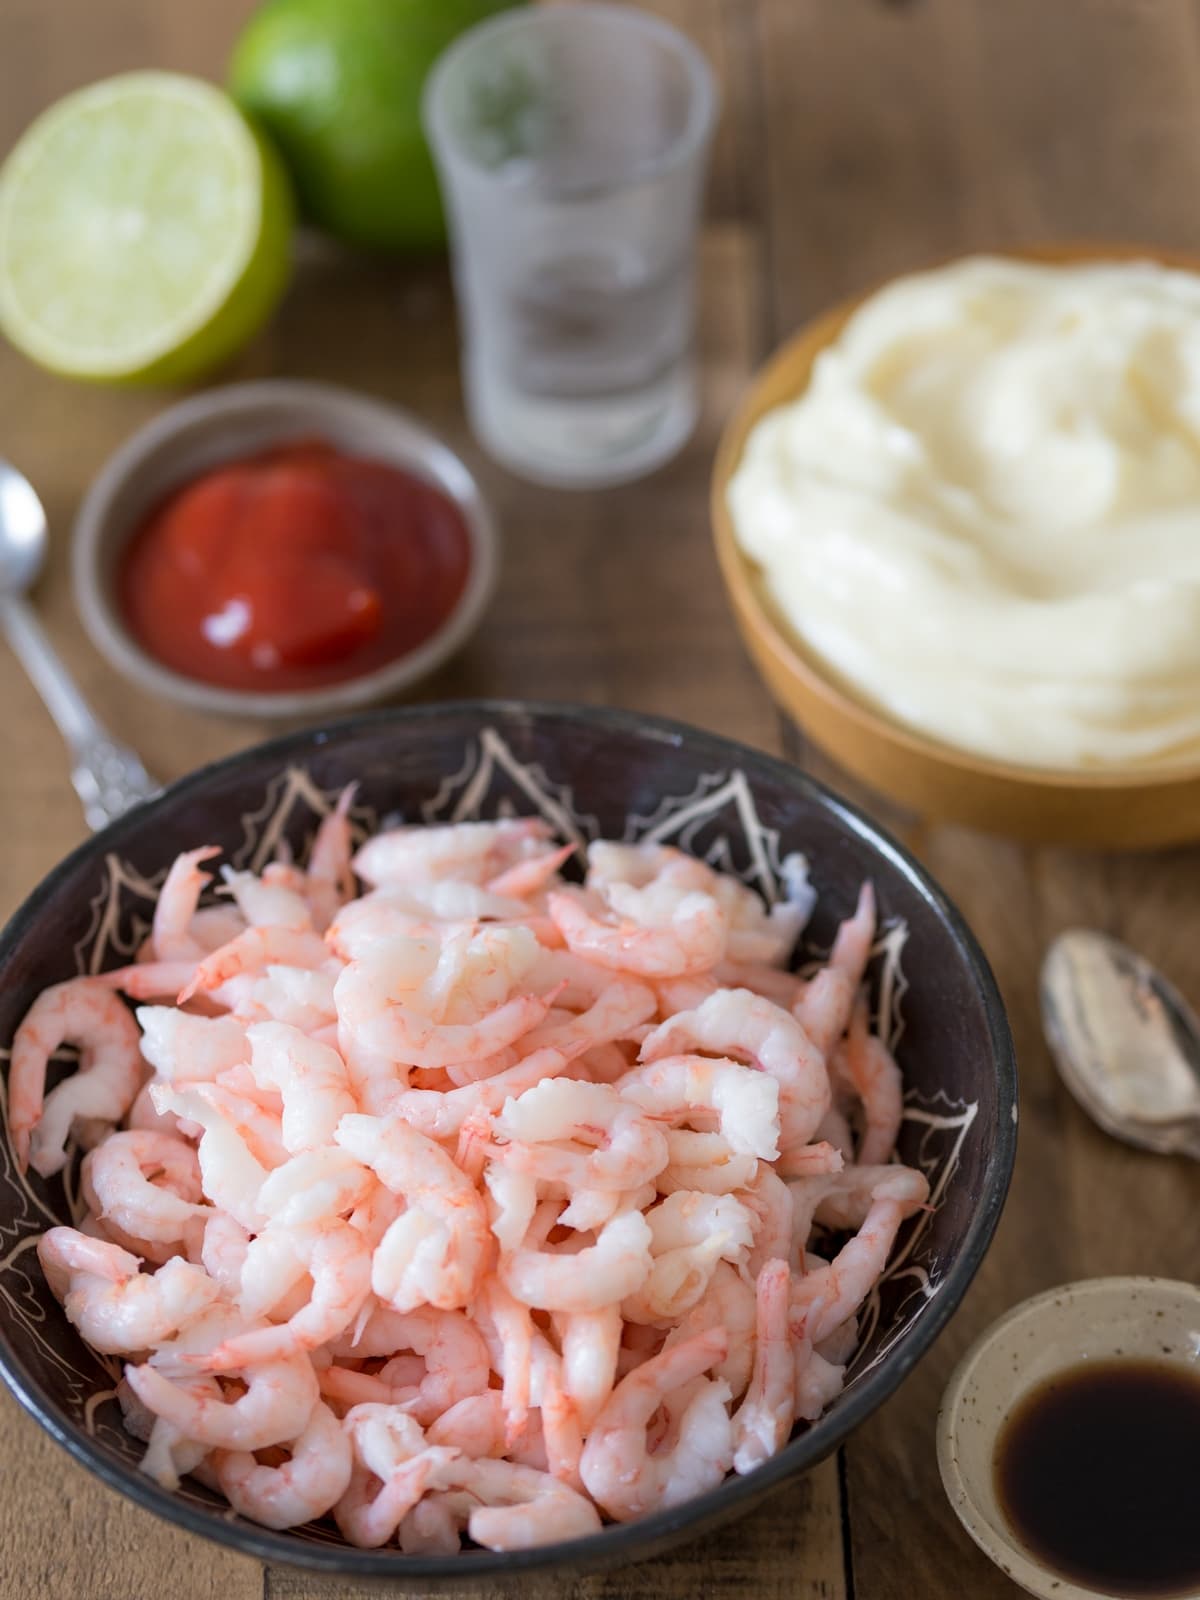 Ingredients to shrimp in cocktail sauce.